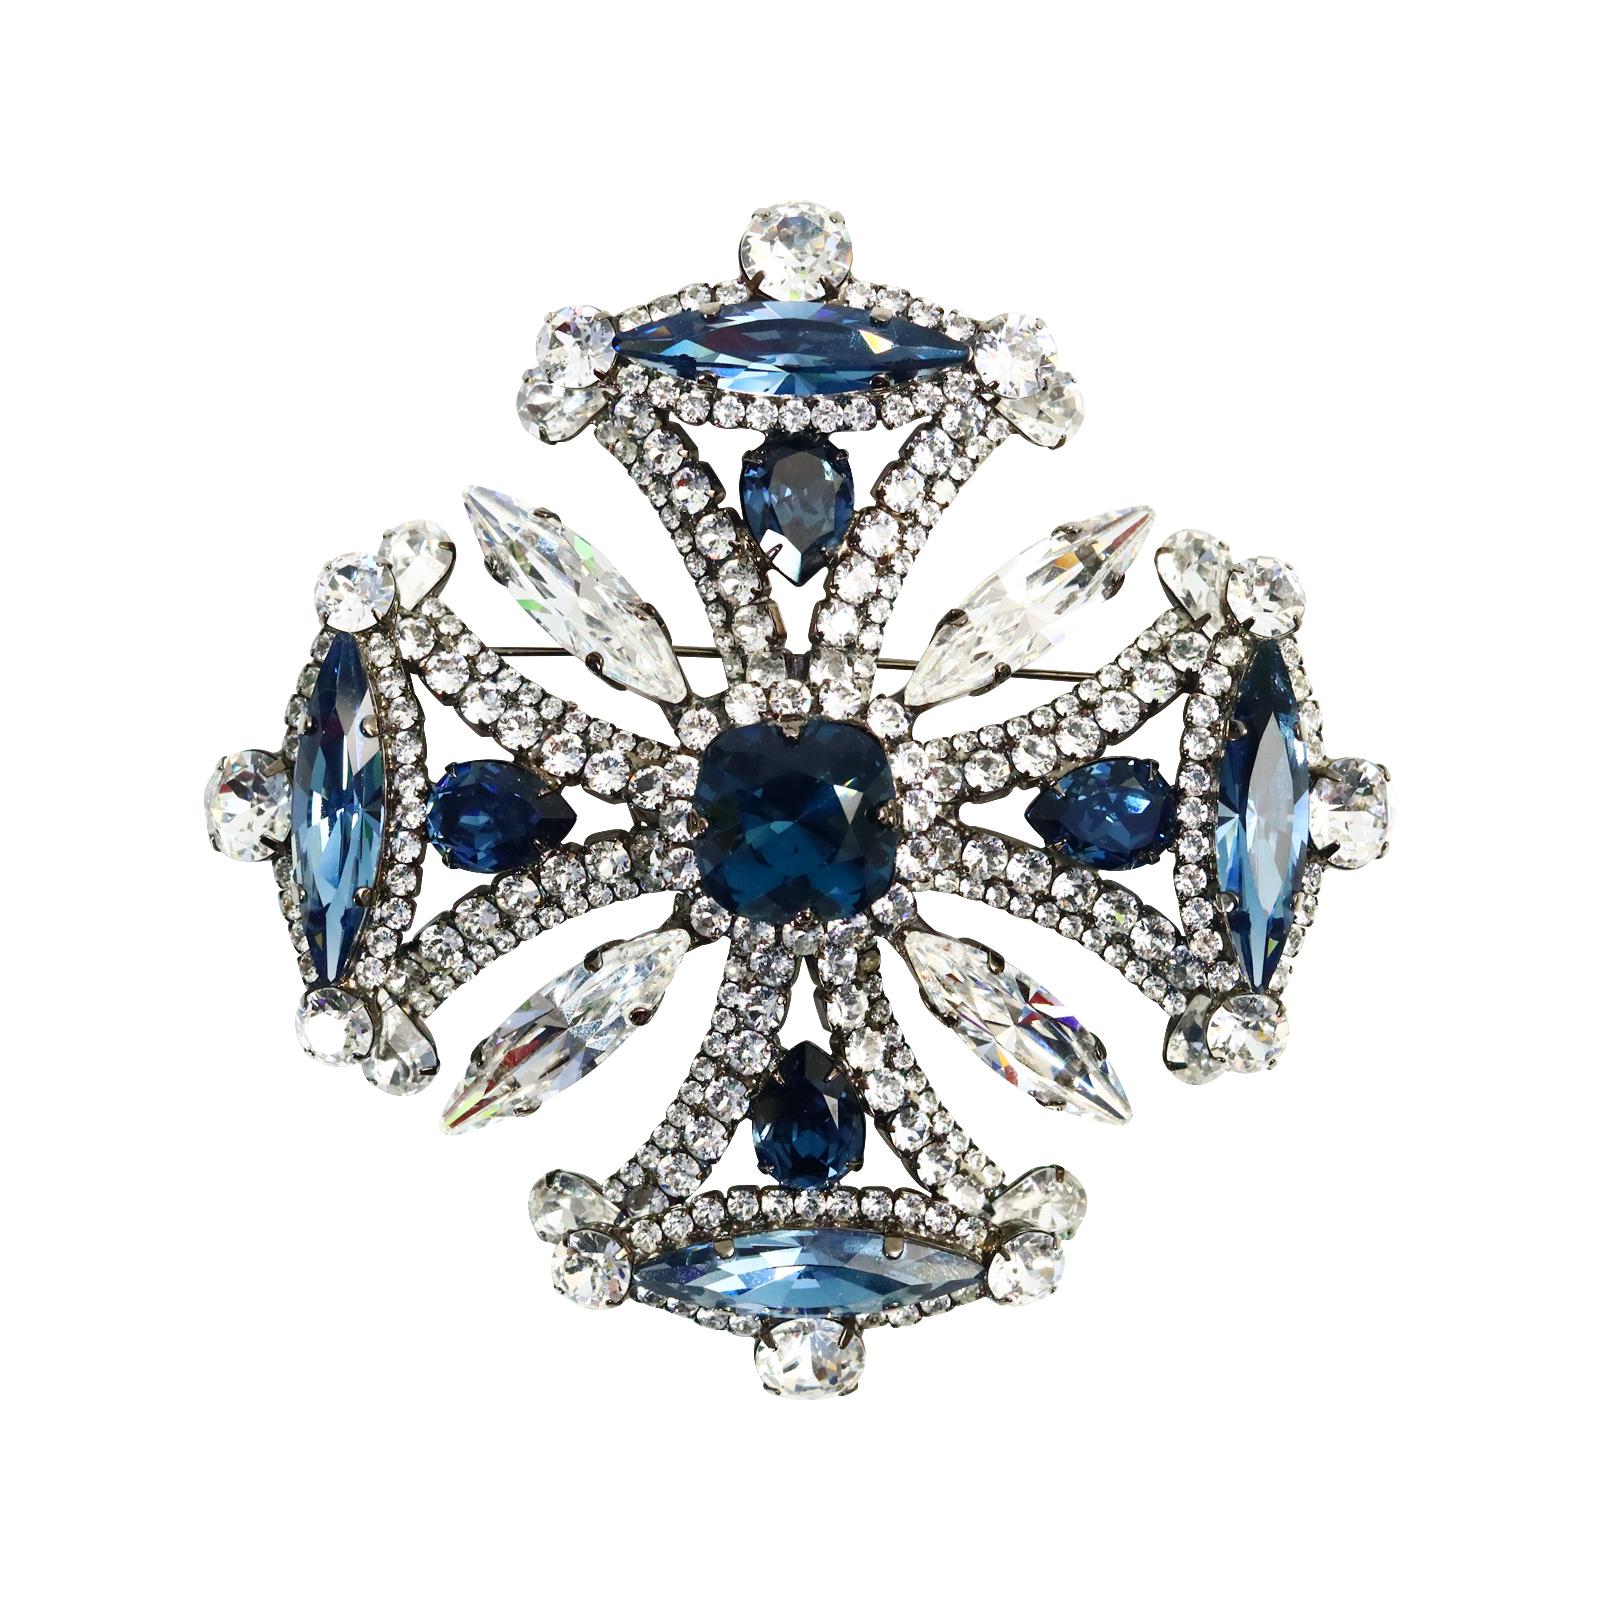 Collectible Tim Szlyk Sapphire Blue and Clear Crystal Brooch and Pendant.  In the shape of a Maltese cross. His work is remarkable. Prong set.  Would look great on the back of a jacket at the waist which is one of my favorite places to wear a large